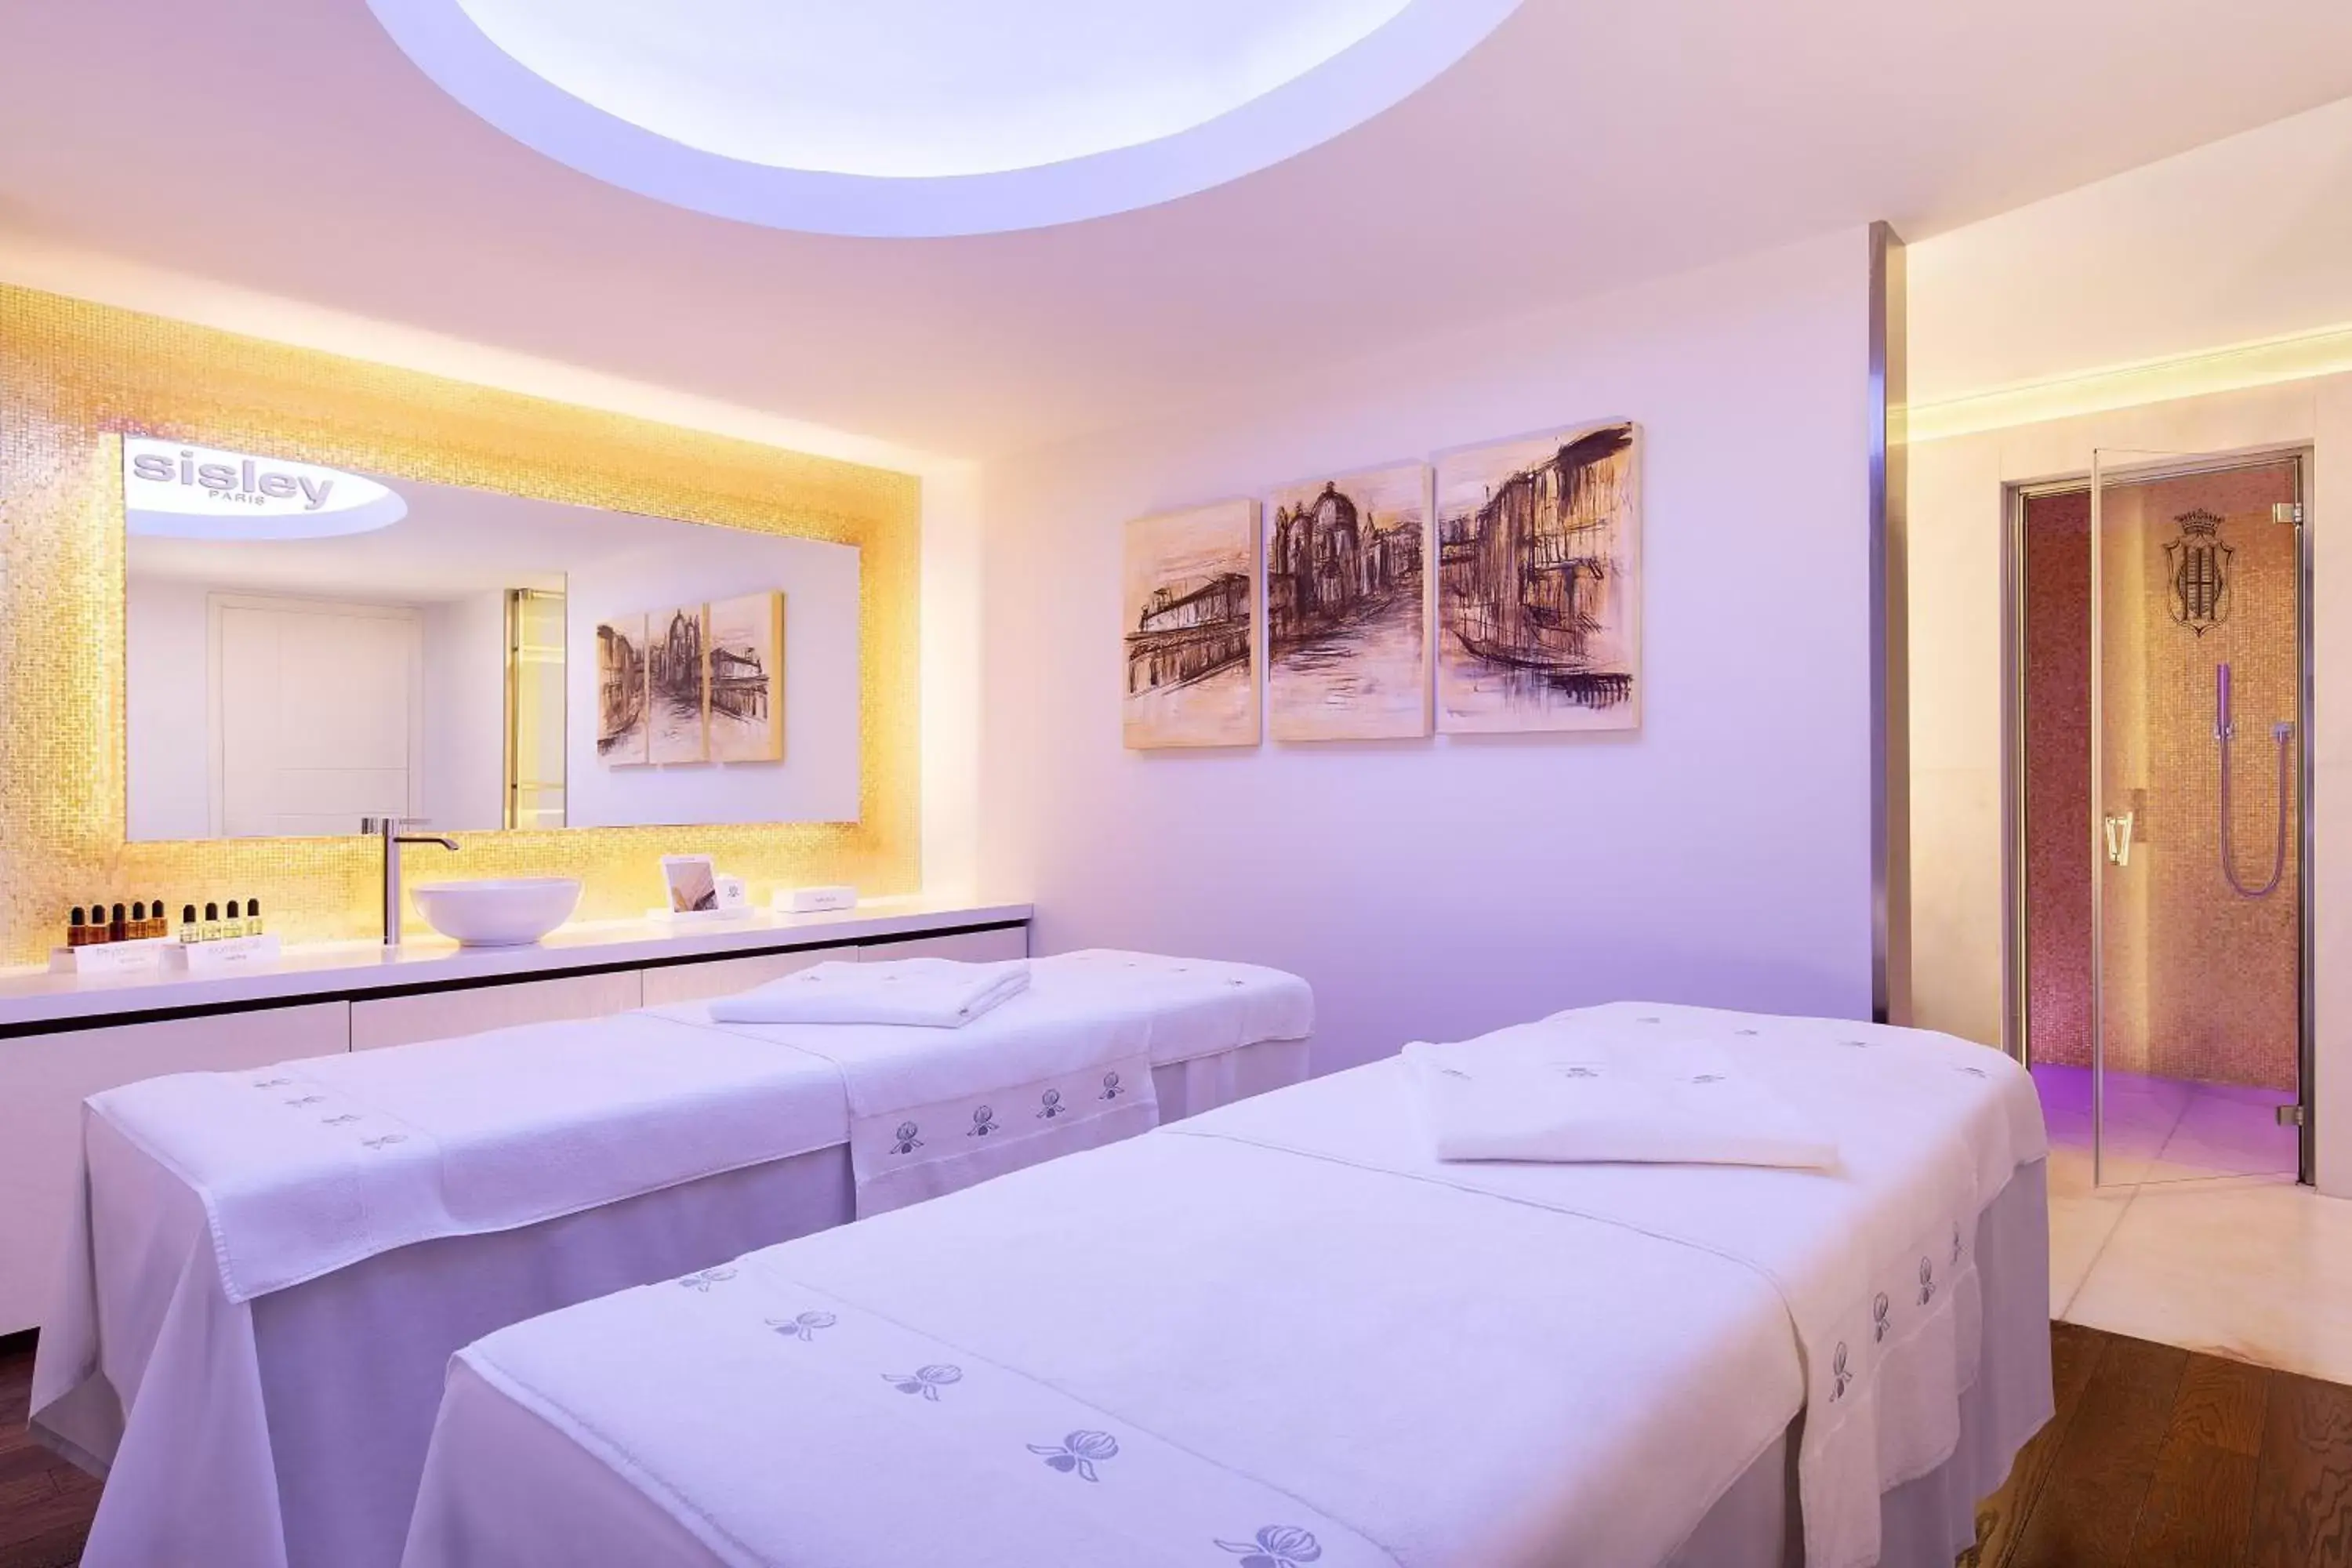 Spa and wellness centre/facilities, Spa/Wellness in The Gritti Palace, a Luxury Collection Hotel, Venice